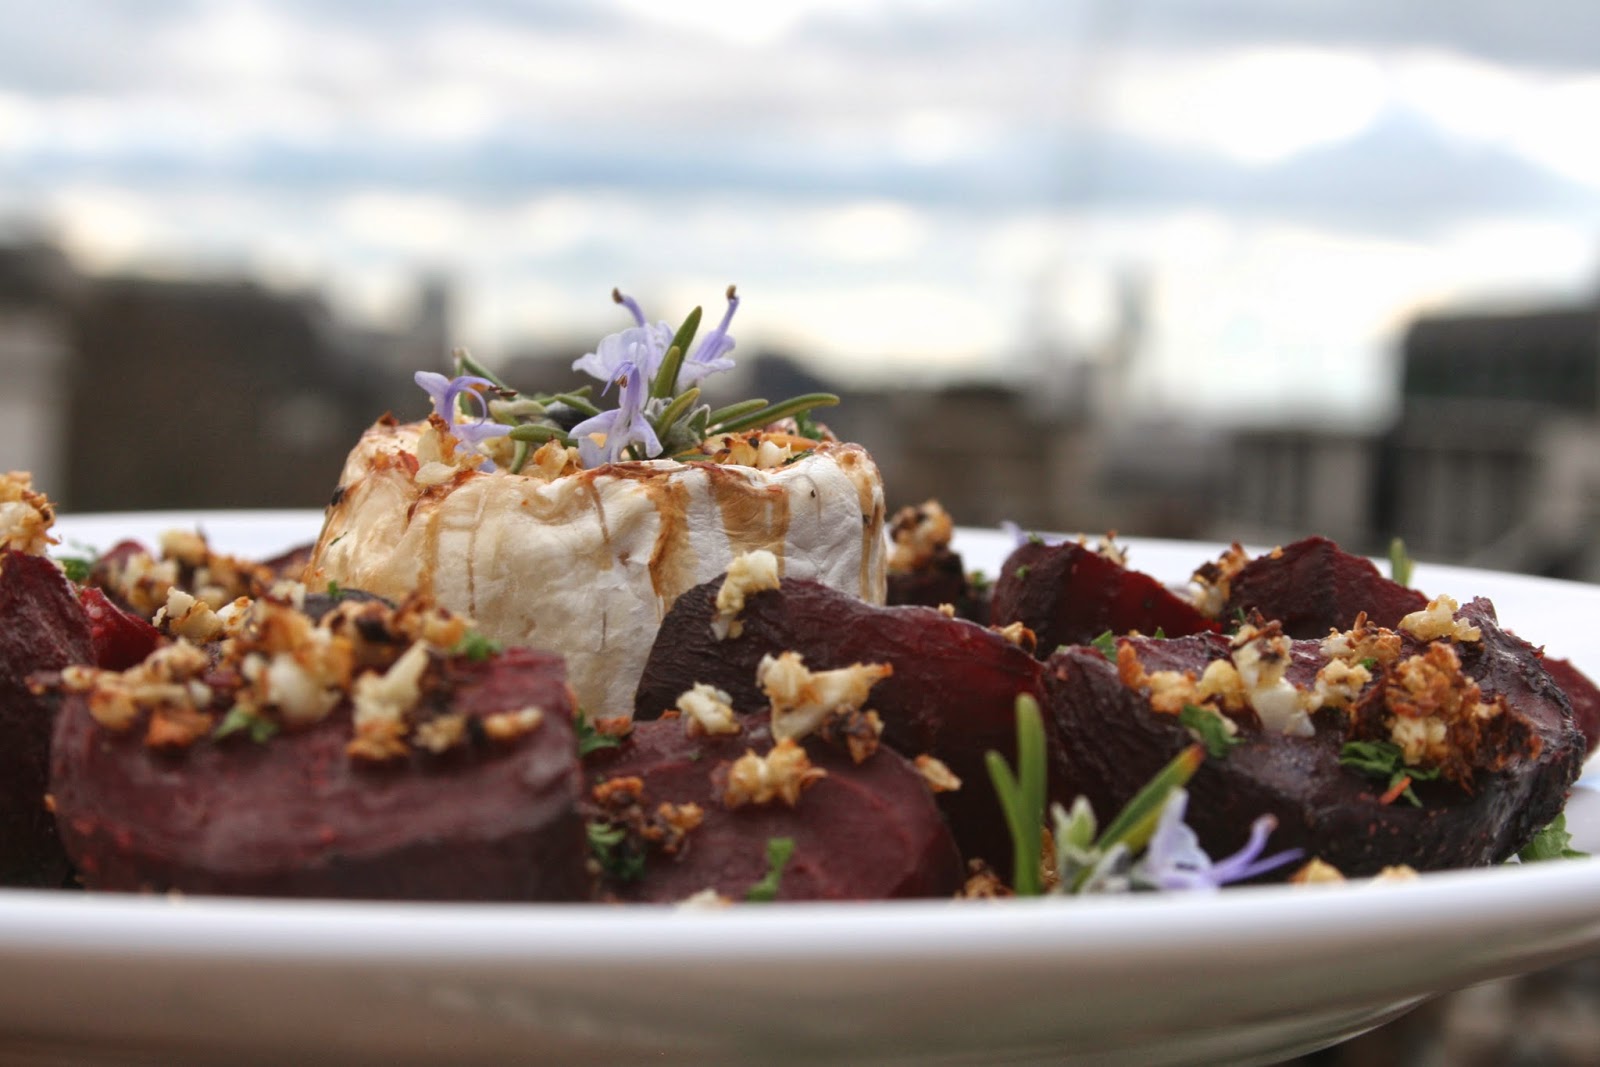 Roasted Beets with Goats Cheese and Rosemary Cauliflower 'Bread' Crumbs